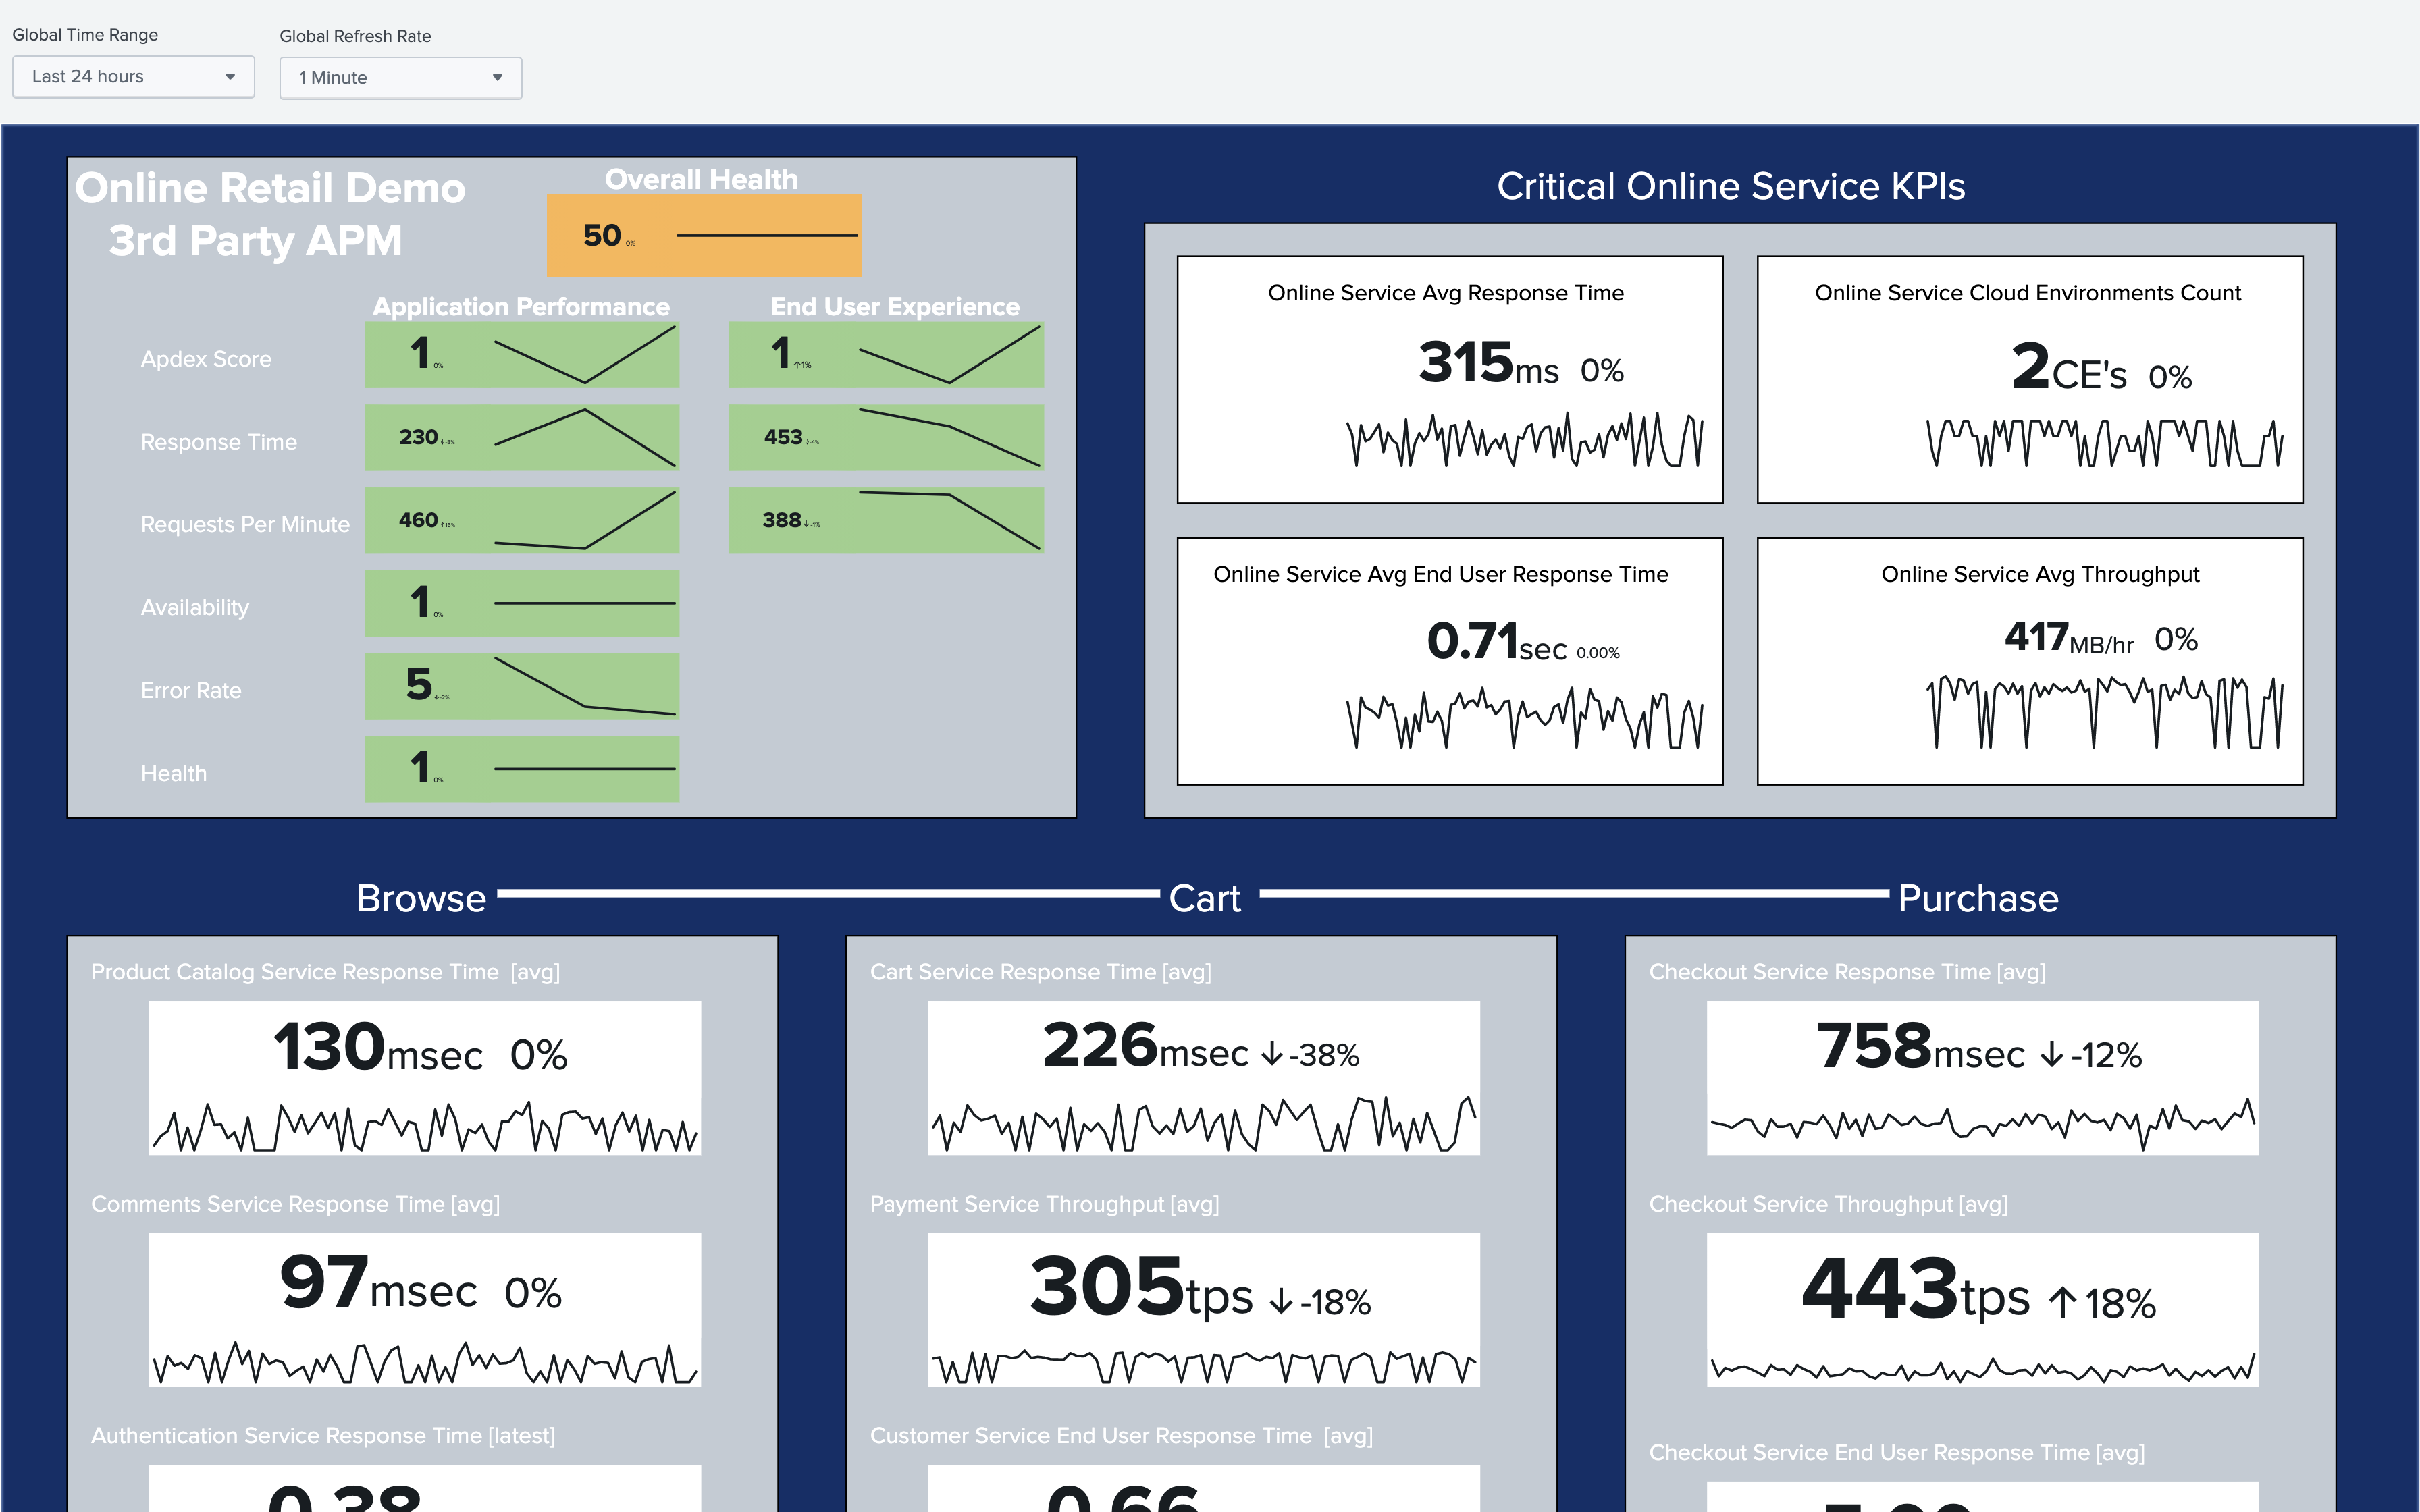 This image shows the APM Online Retail Demo Glass Table populated with example data. Metrics displayed include Apdex Score, Refresh Rate, Requests Per Minute, and Error Rate.